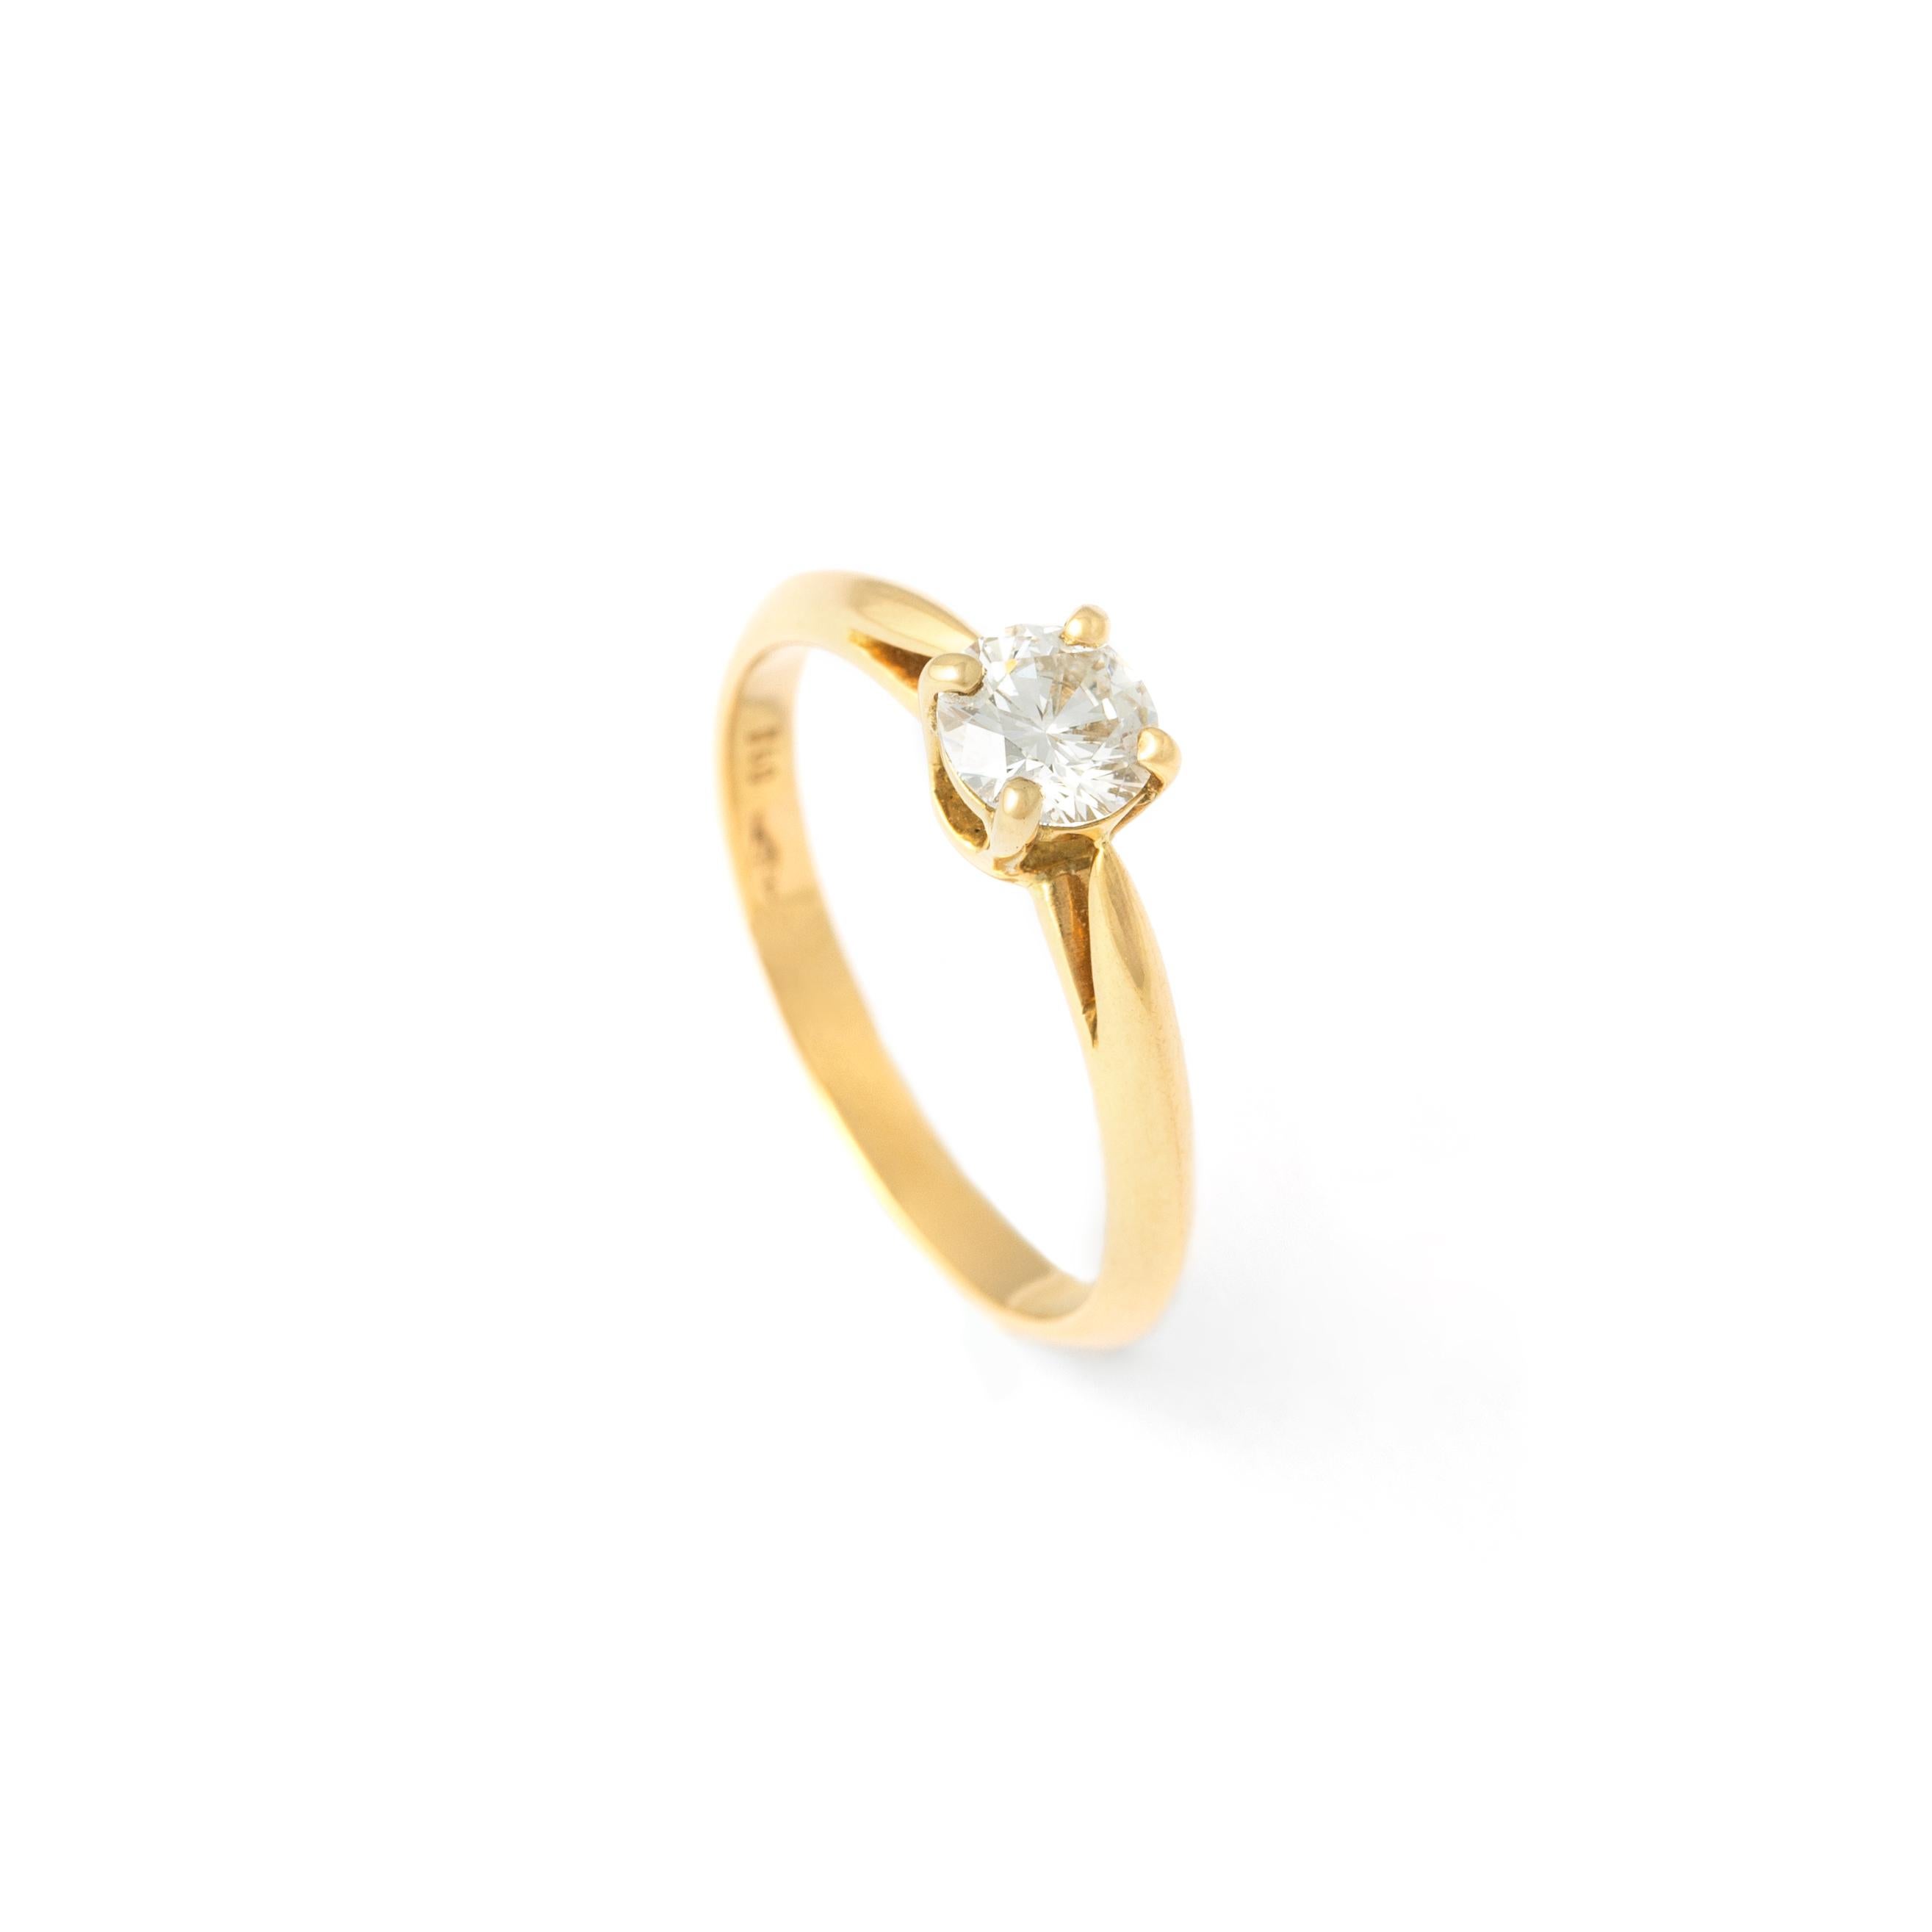 Embrace timeless sophistication with our Diamond Yellow Gold 18K Ring, featuring a captivating centerpiece—a round-cut diamond weighing approximately 0.51 carats, with an estimated G color and VVS2 clarity. Set in the warmth of 18K yellow gold, the